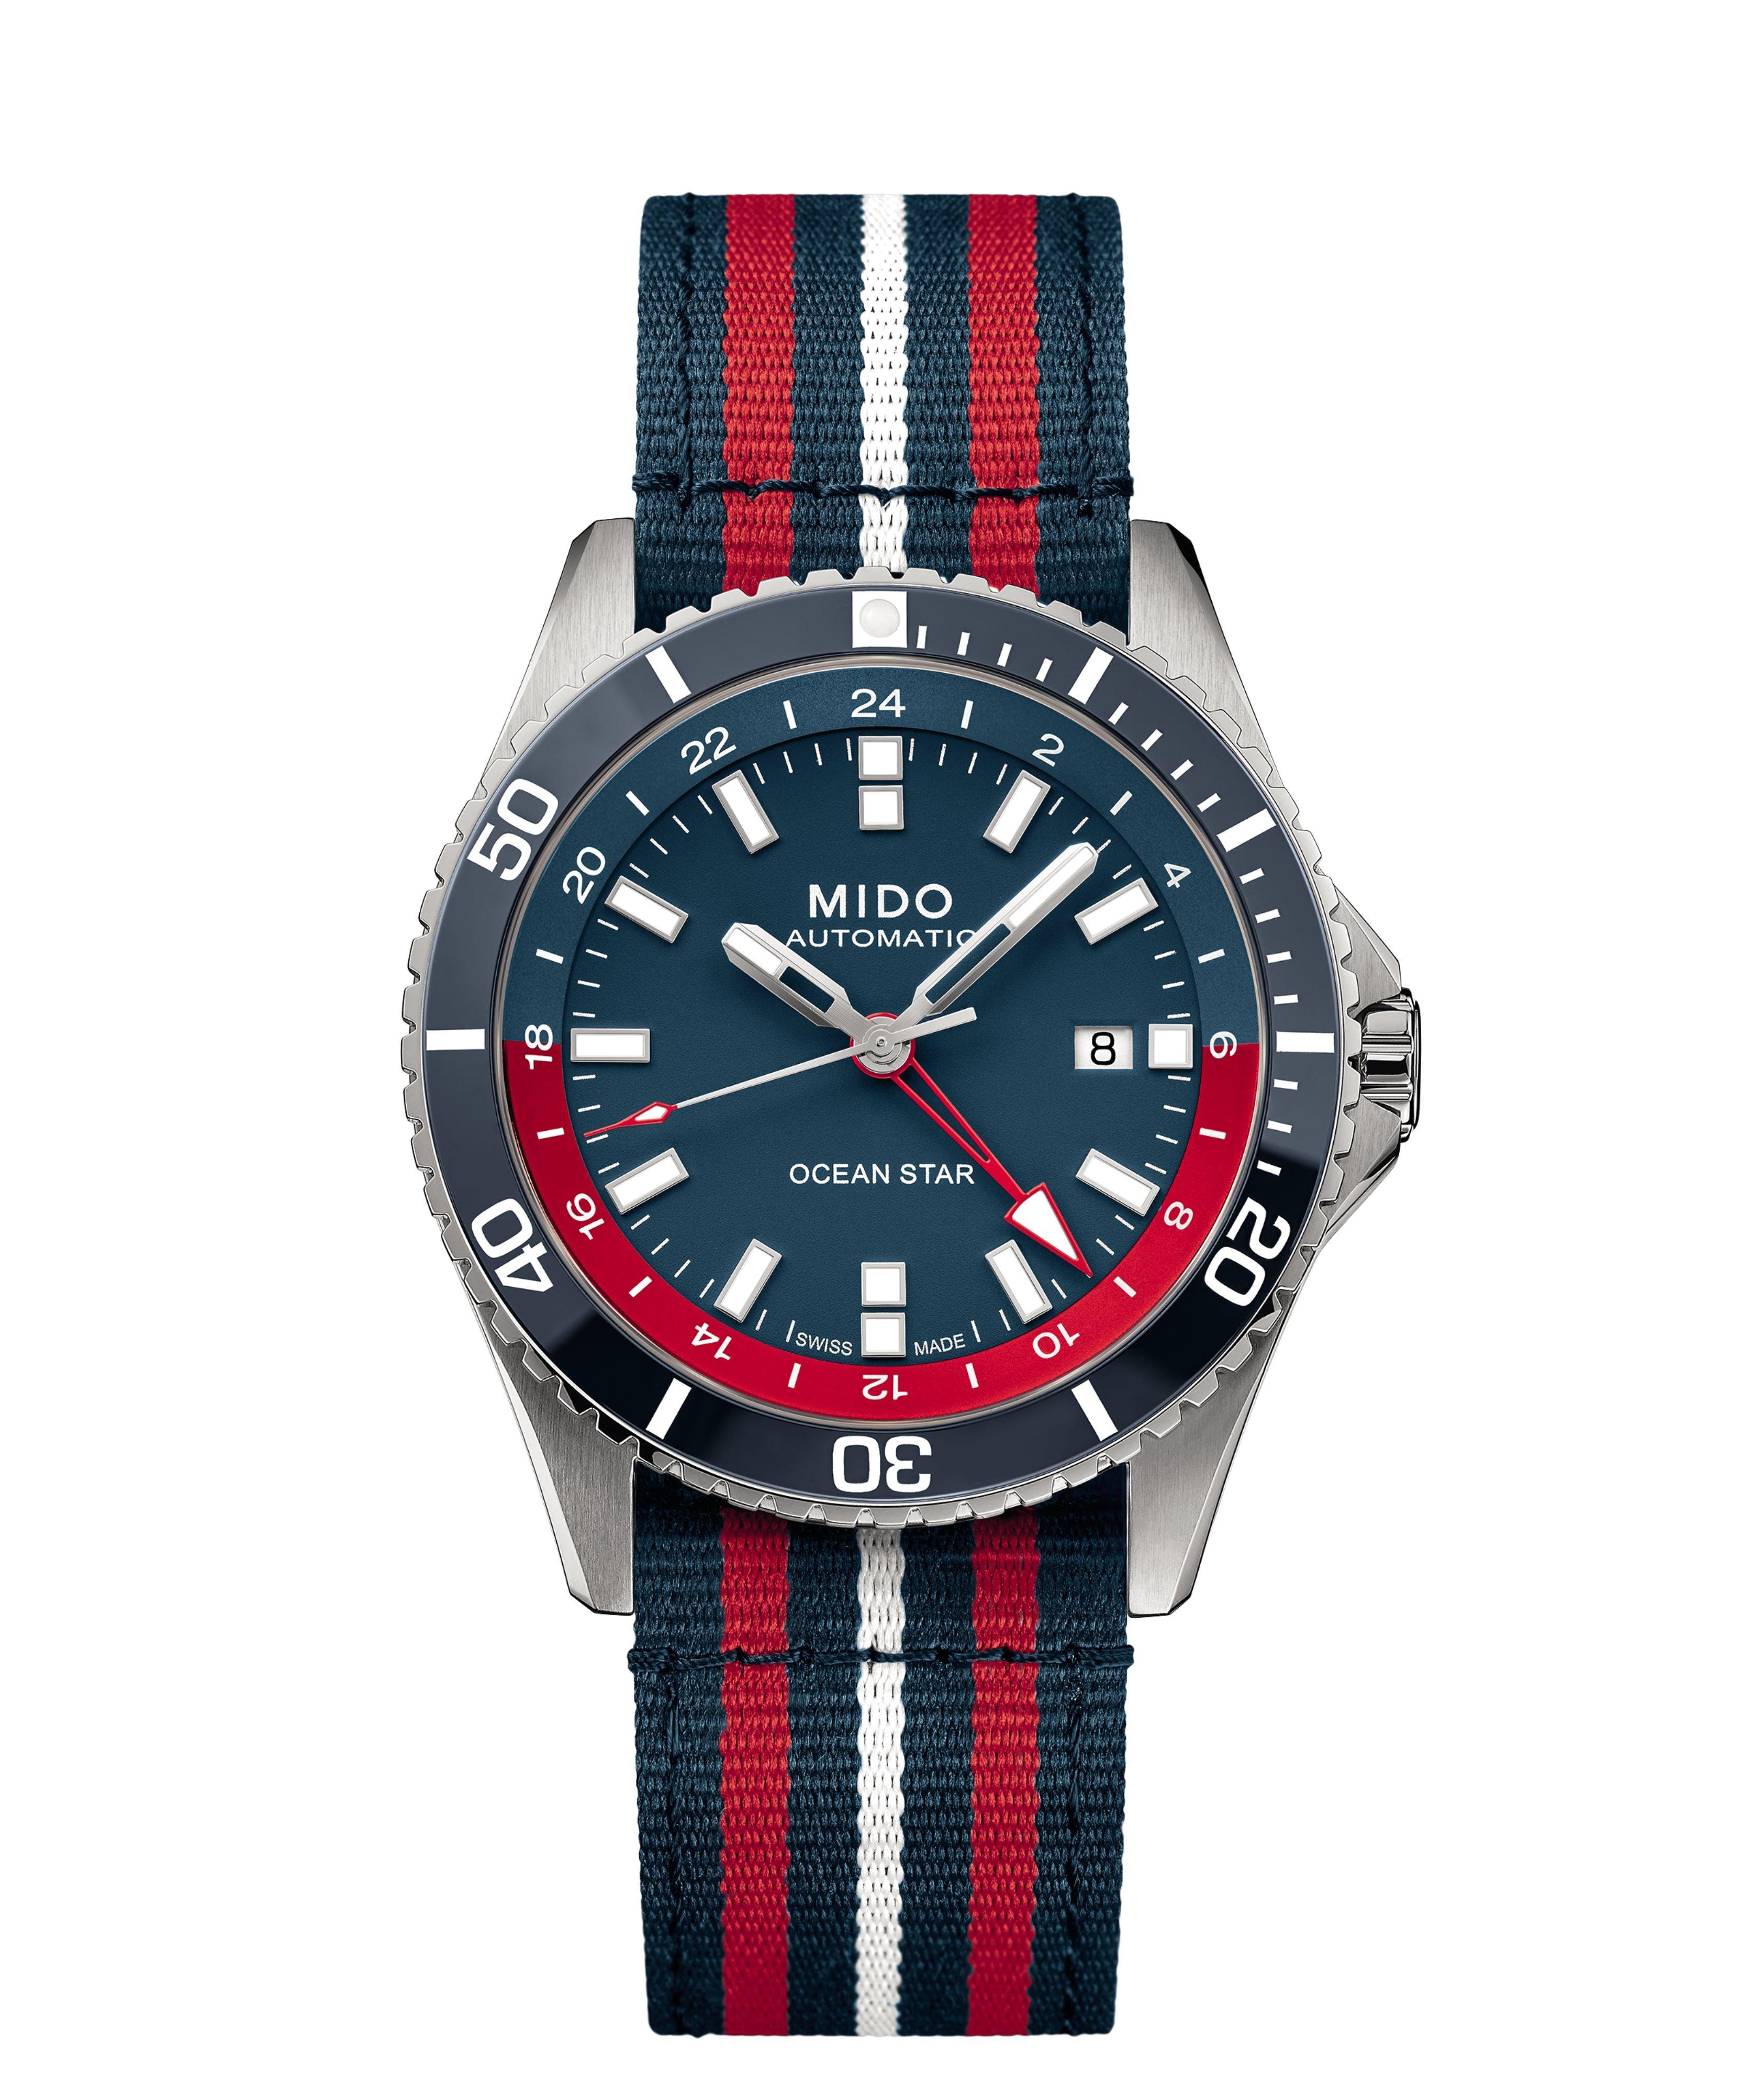 Ocean Star GMT, Special Edition image 1